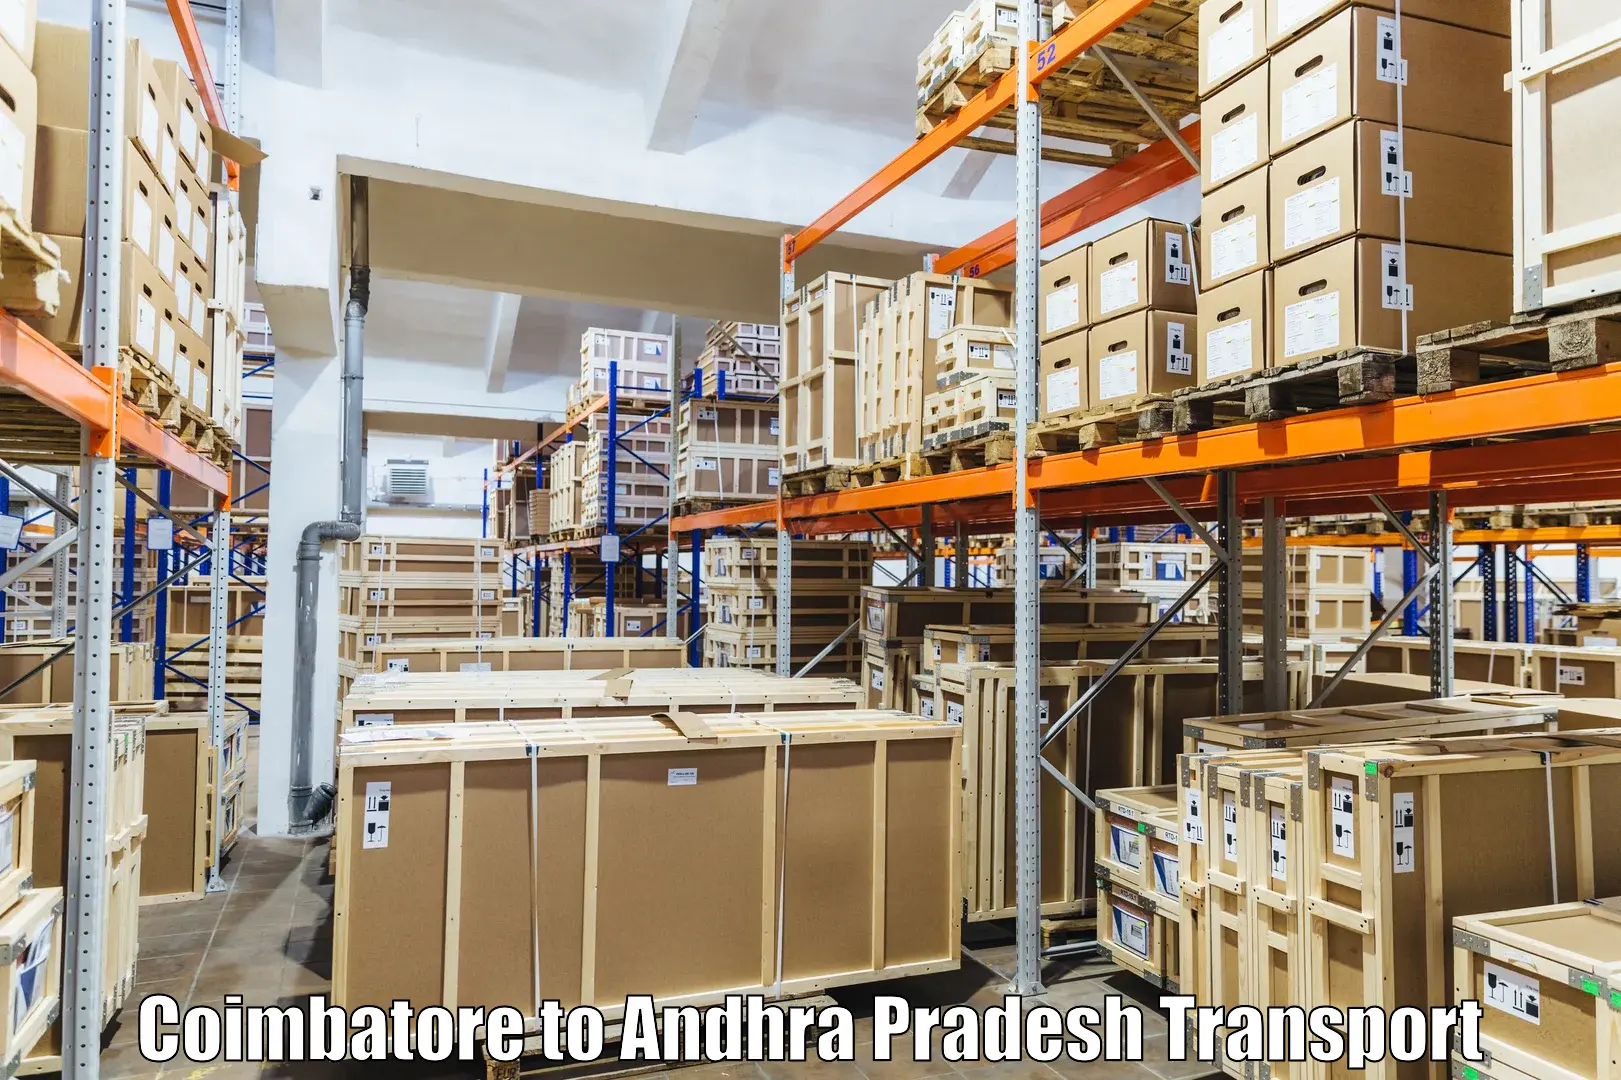 Nationwide transport services in Coimbatore to Proddatur